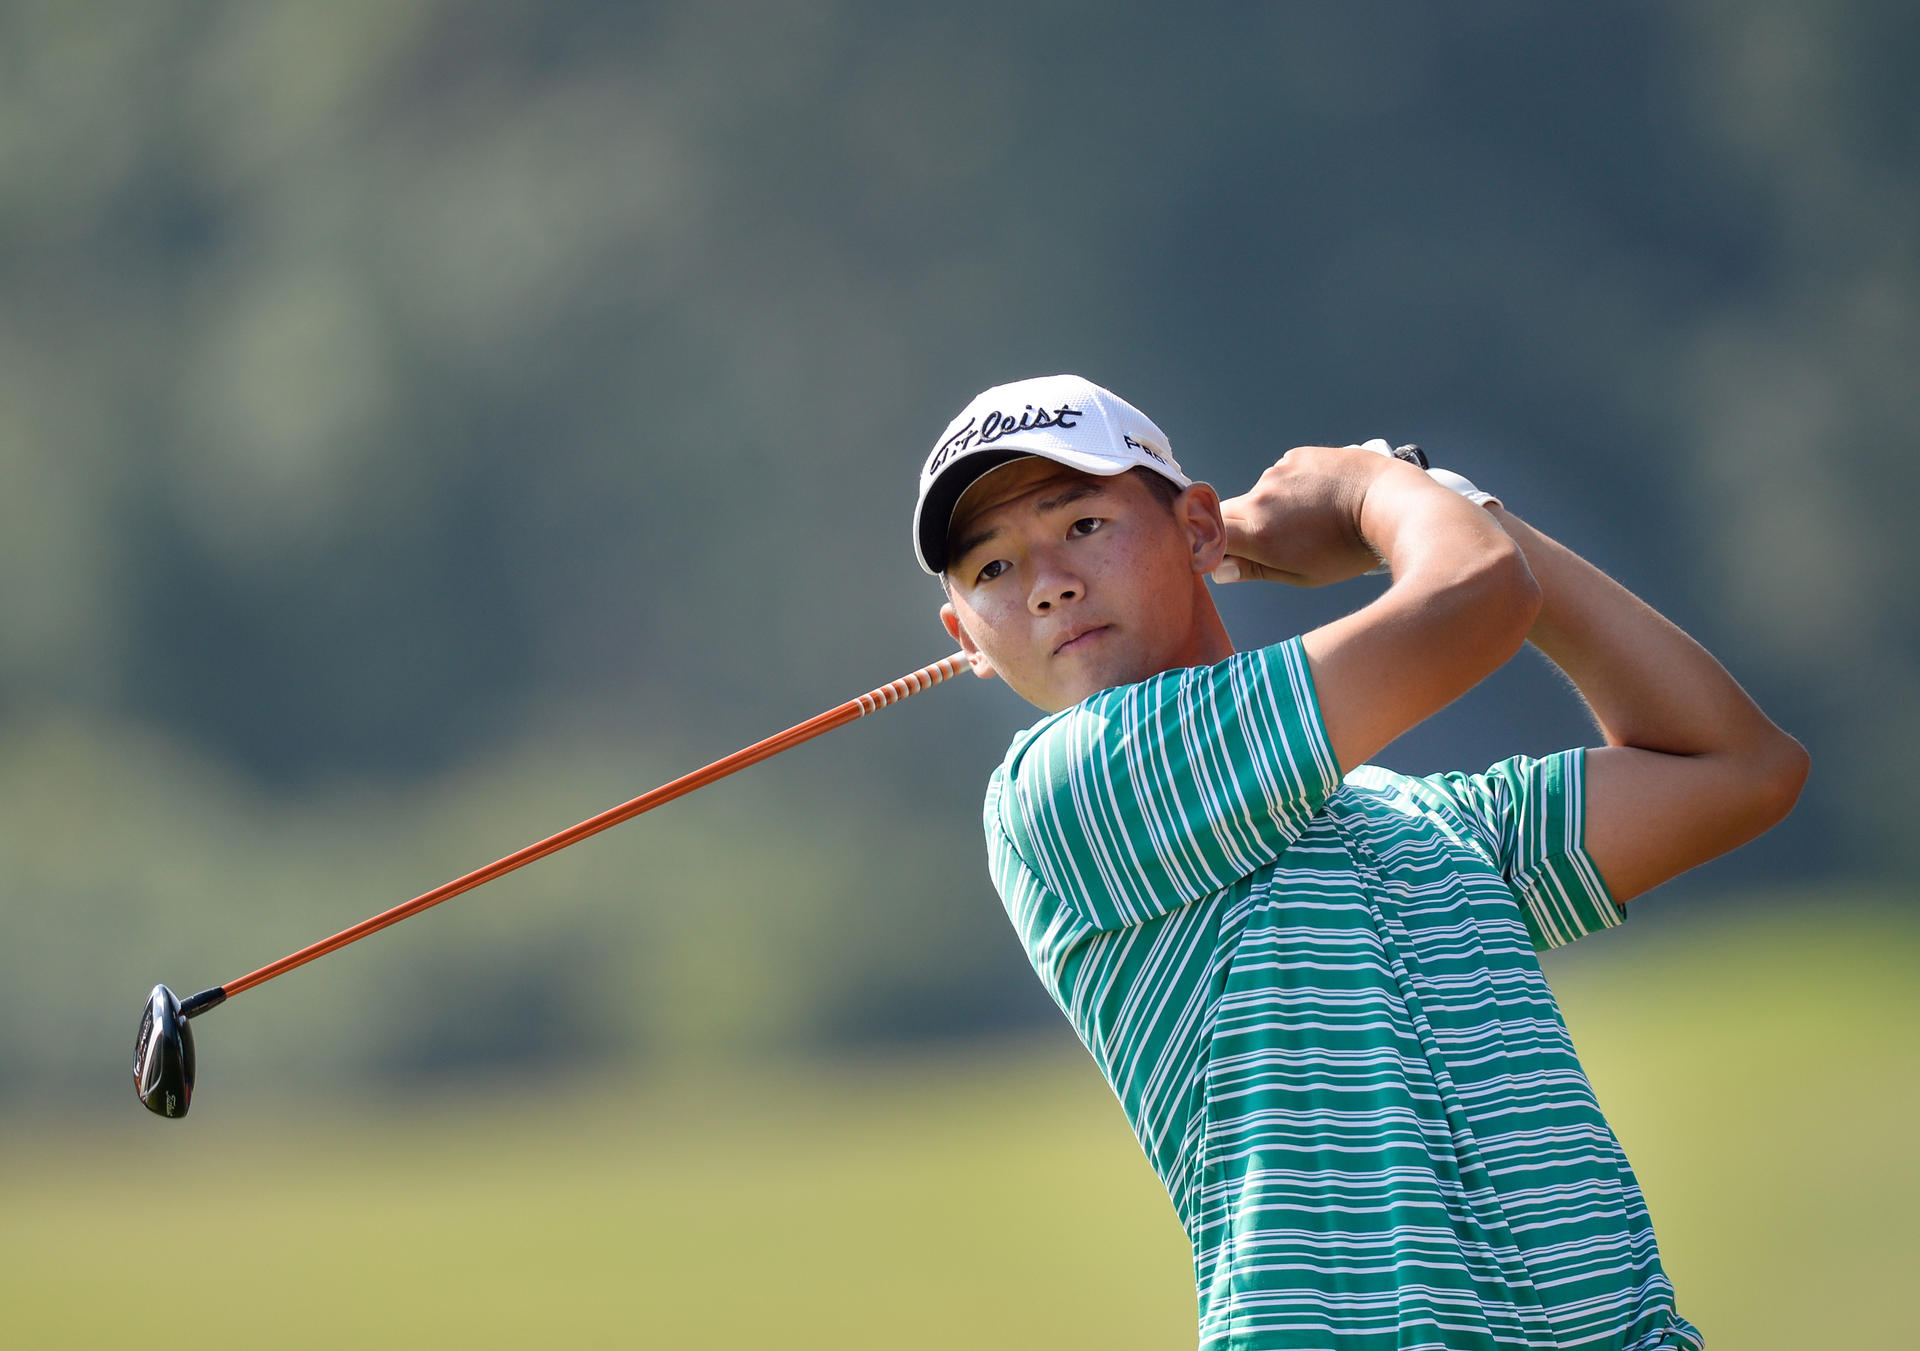 Jason Hak watches a drive during practice at Fanling ahead of Thursday's first round of the Hong Kong Open. Photo: Richard Castka